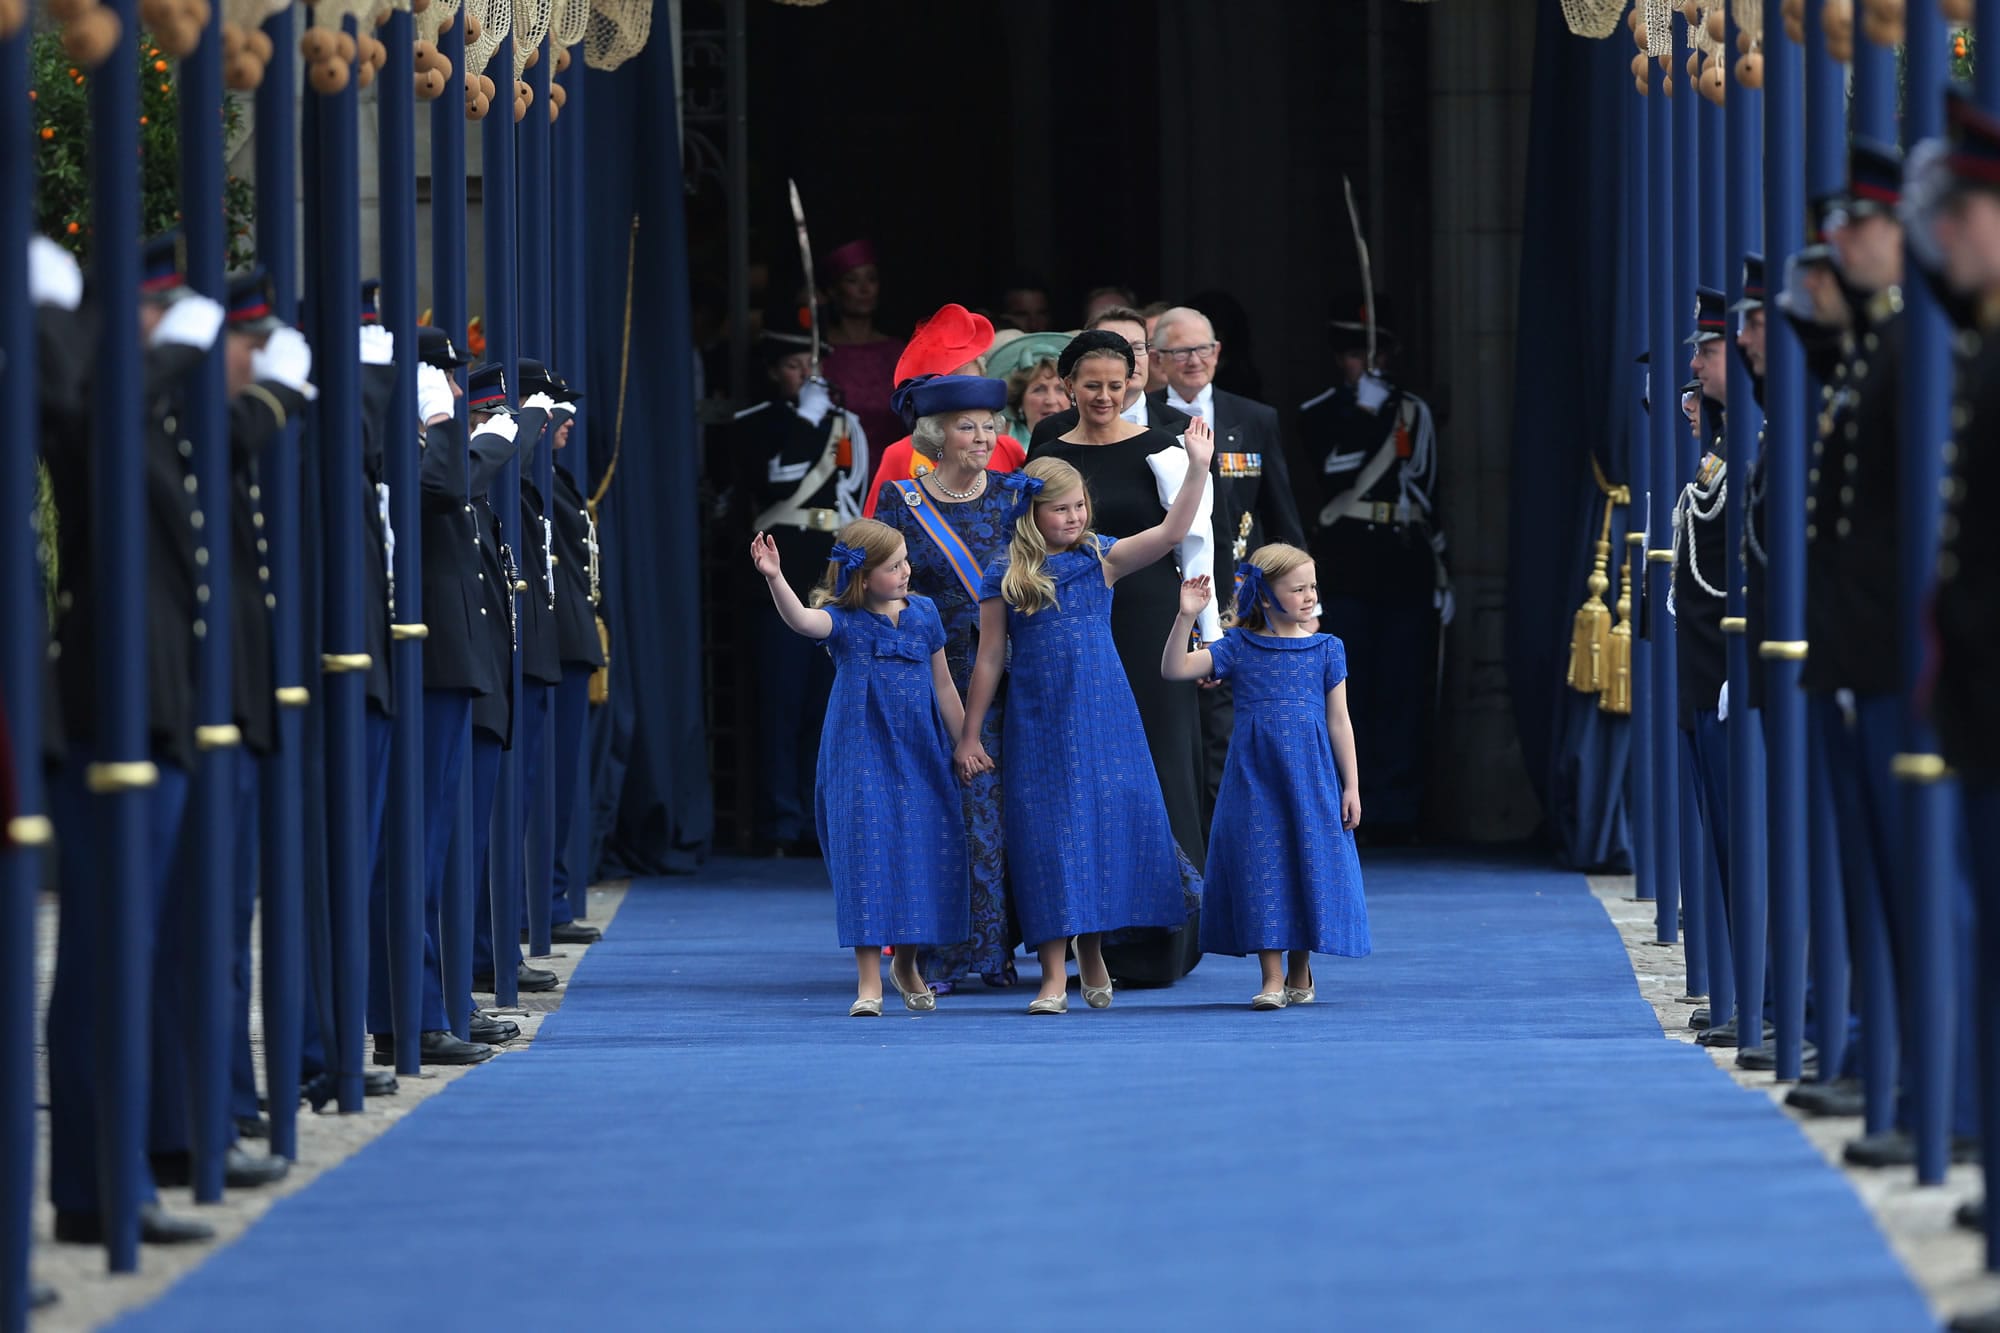 Dutch Princess Beatrix, back left, arrives with princesses from left; Alexia, Catharina-Amalia and Ariane at the Nieuwe Kerk or New Church in Amsterdam, The Netherlands, prior to the inauguration of King Willem-Alexander on Tuesday.